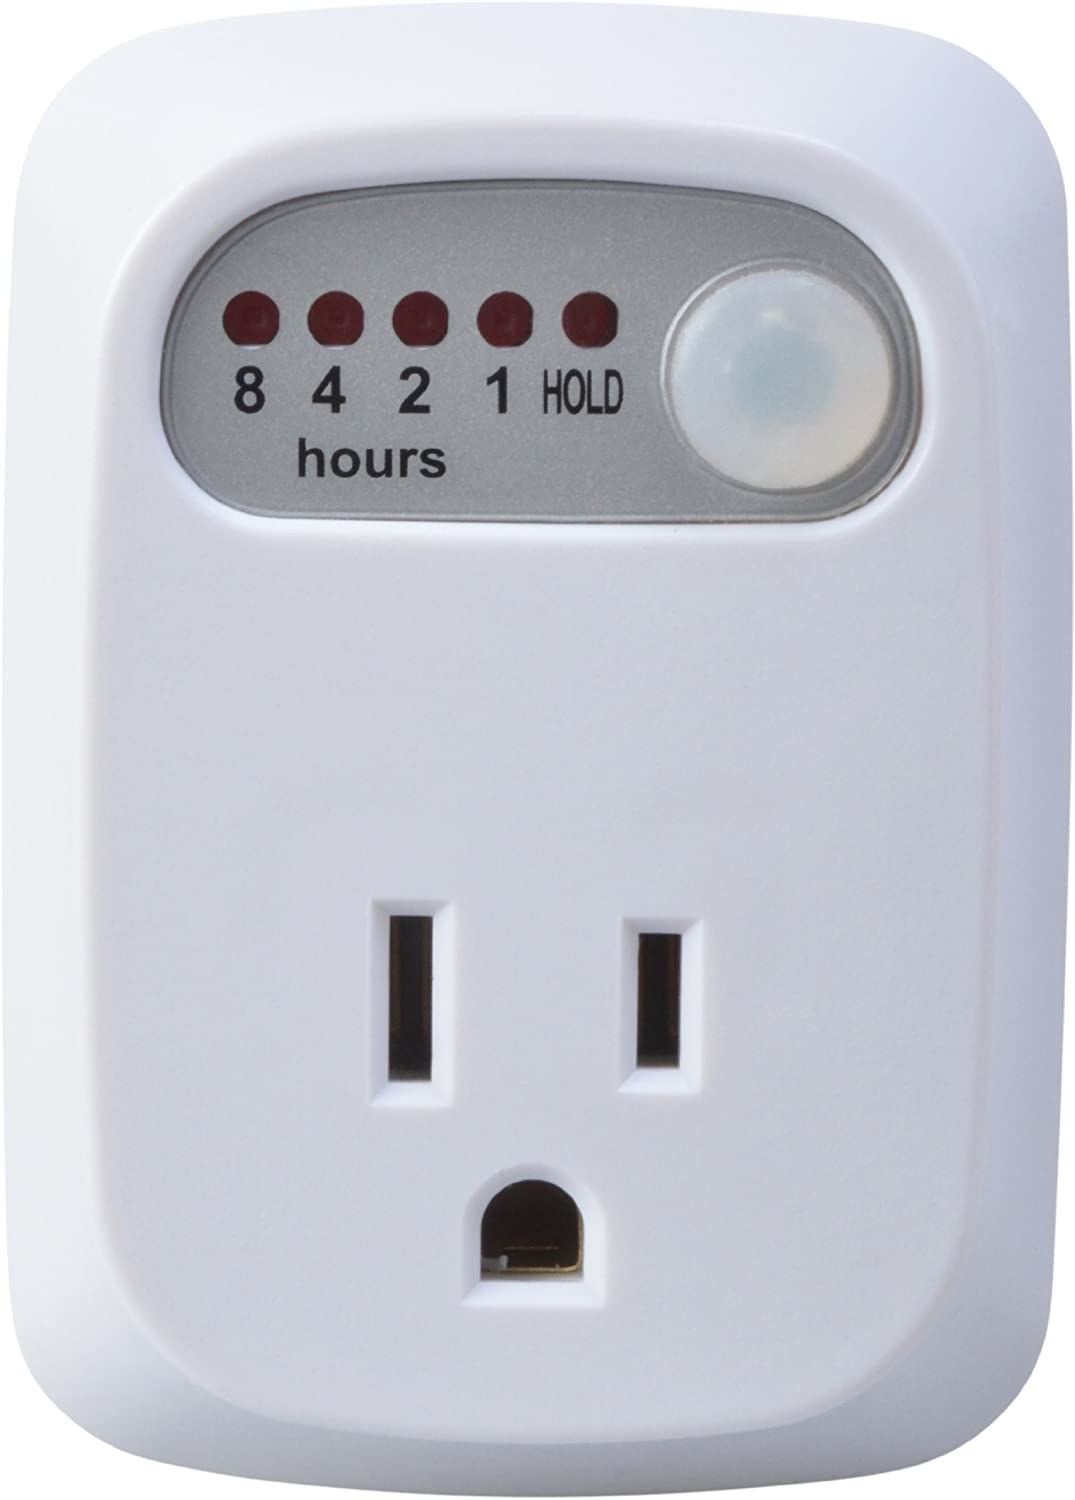 the outlet timer